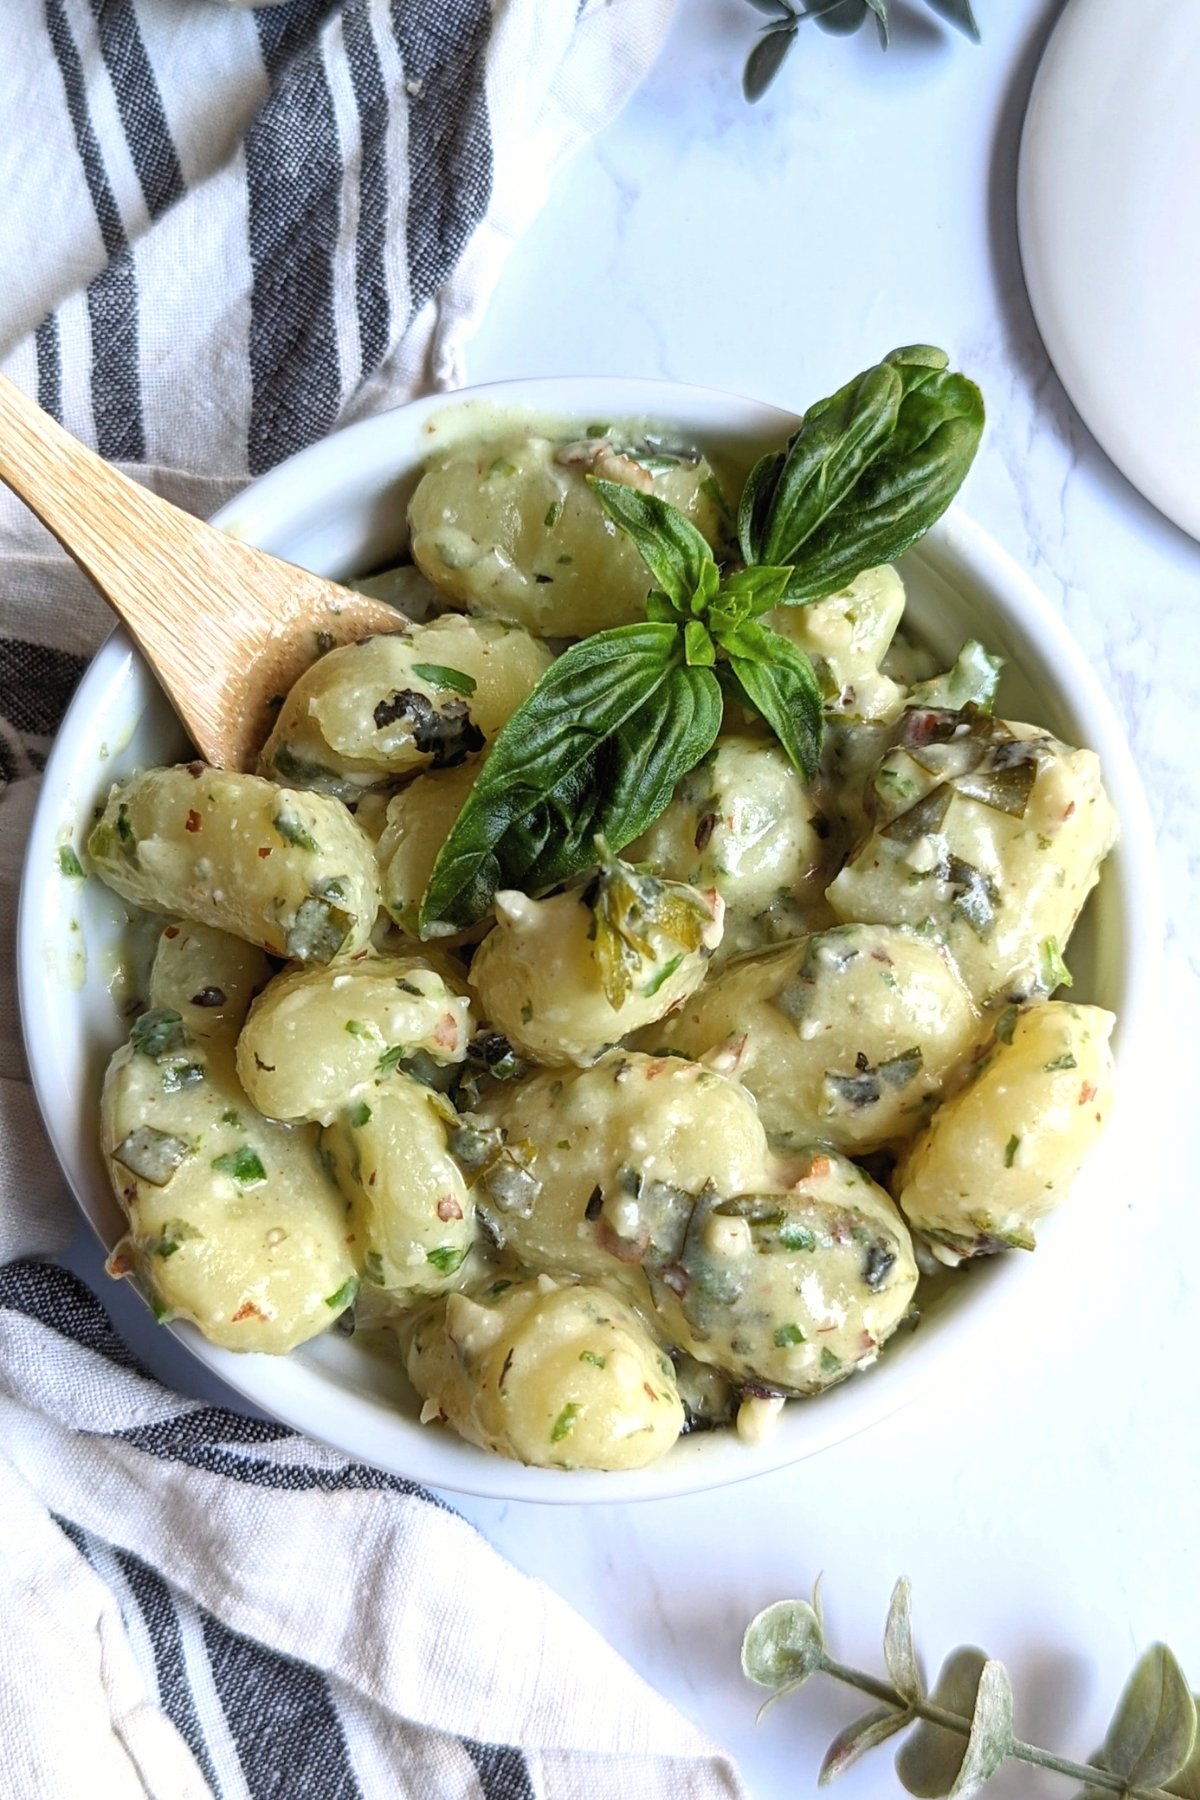 creamy gnocchi with pesto made with basil garlic olive oil water walnuts in a food processor and lemon juice